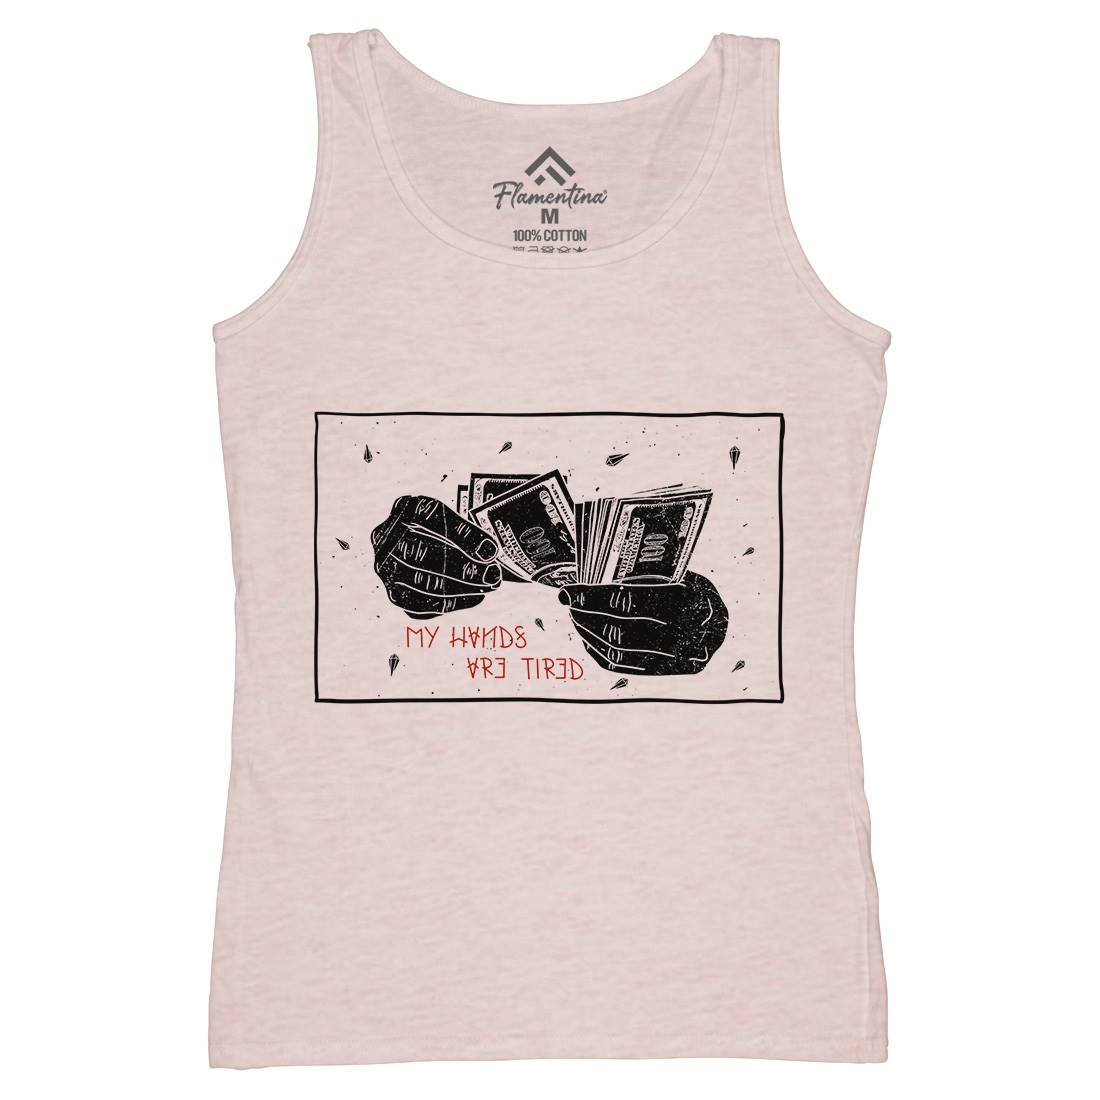 My Hands Are Tired Womens Organic Tank Top Vest Retro D473